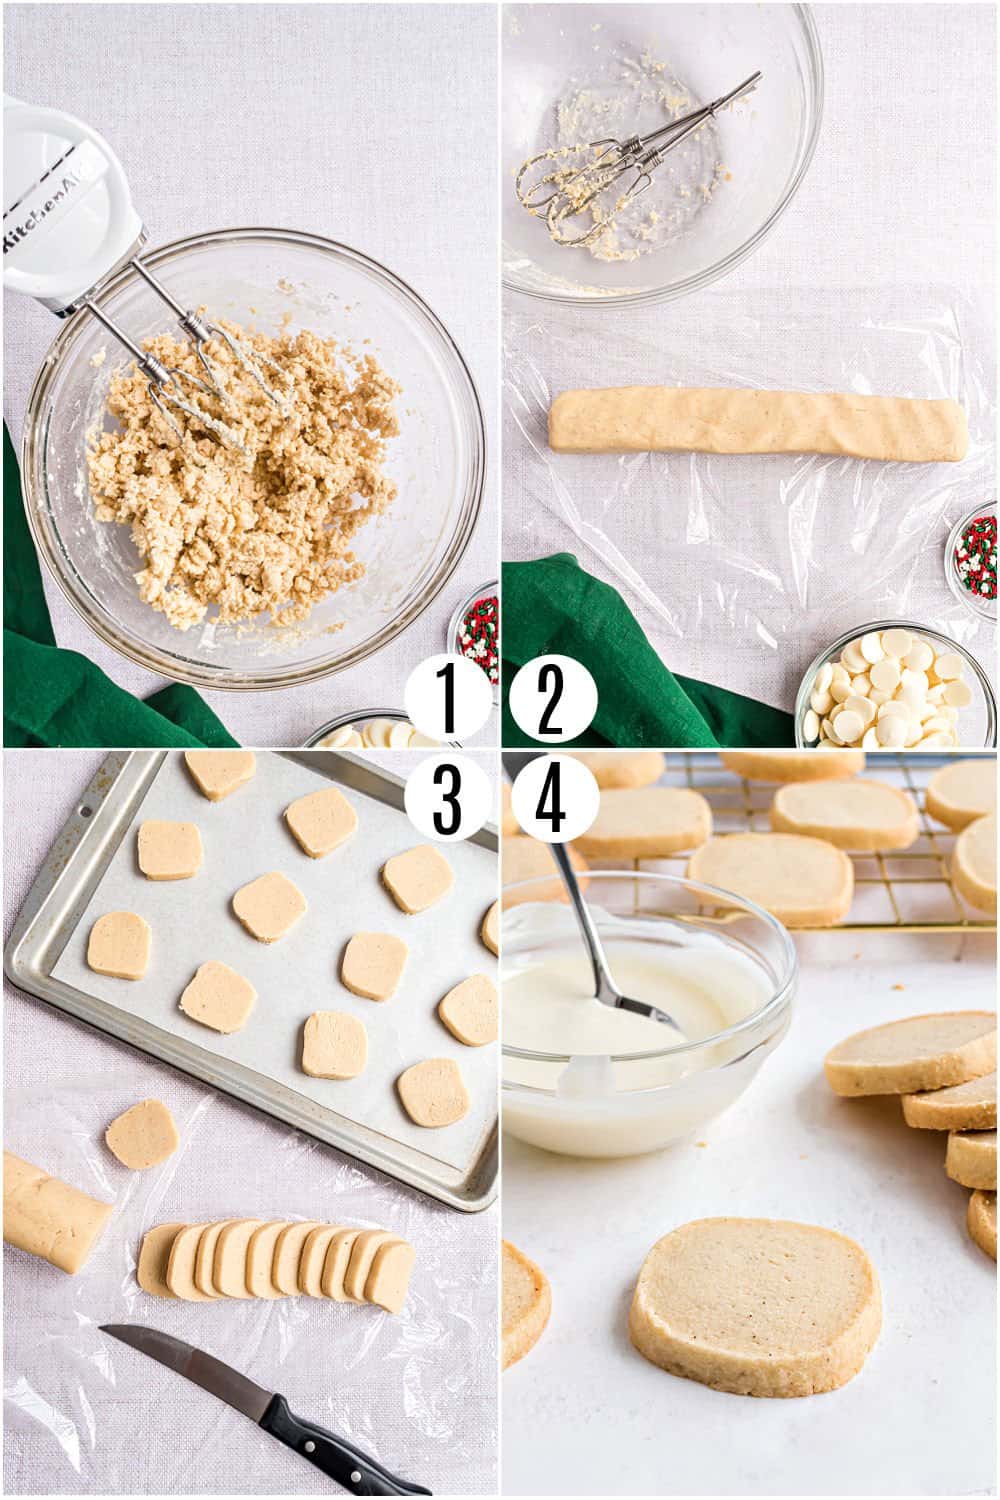 Step by step photos showing how to make vanilla shortbread cookies.